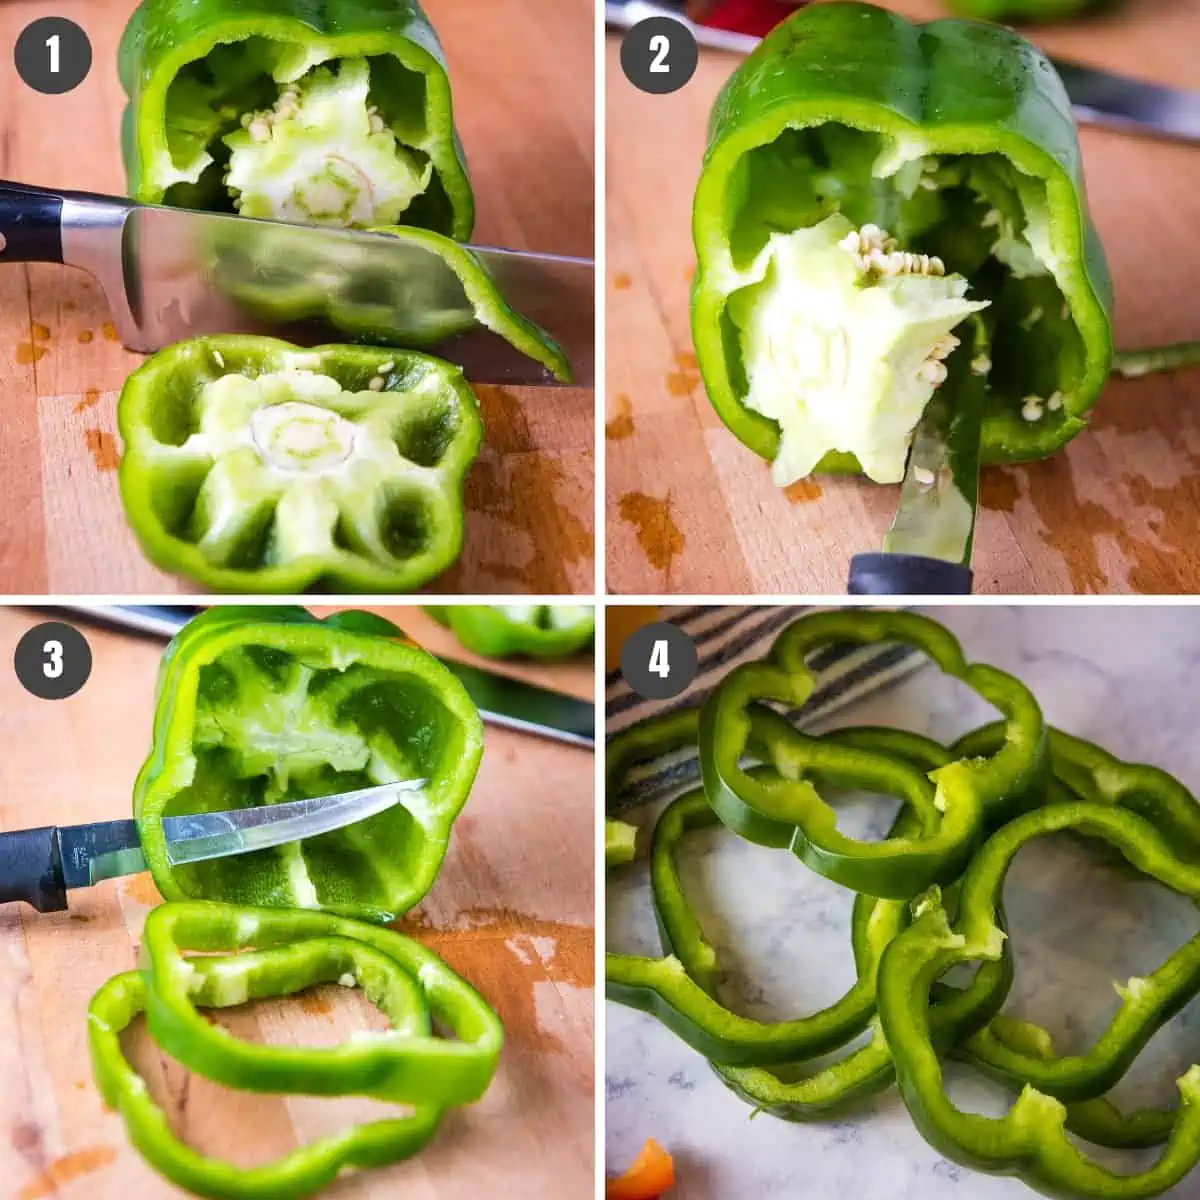 steps for how to cut peppers into rings, including cutting the top off a green bell pepper, coring the pepper, and slicing into rings on butcher block cutting board